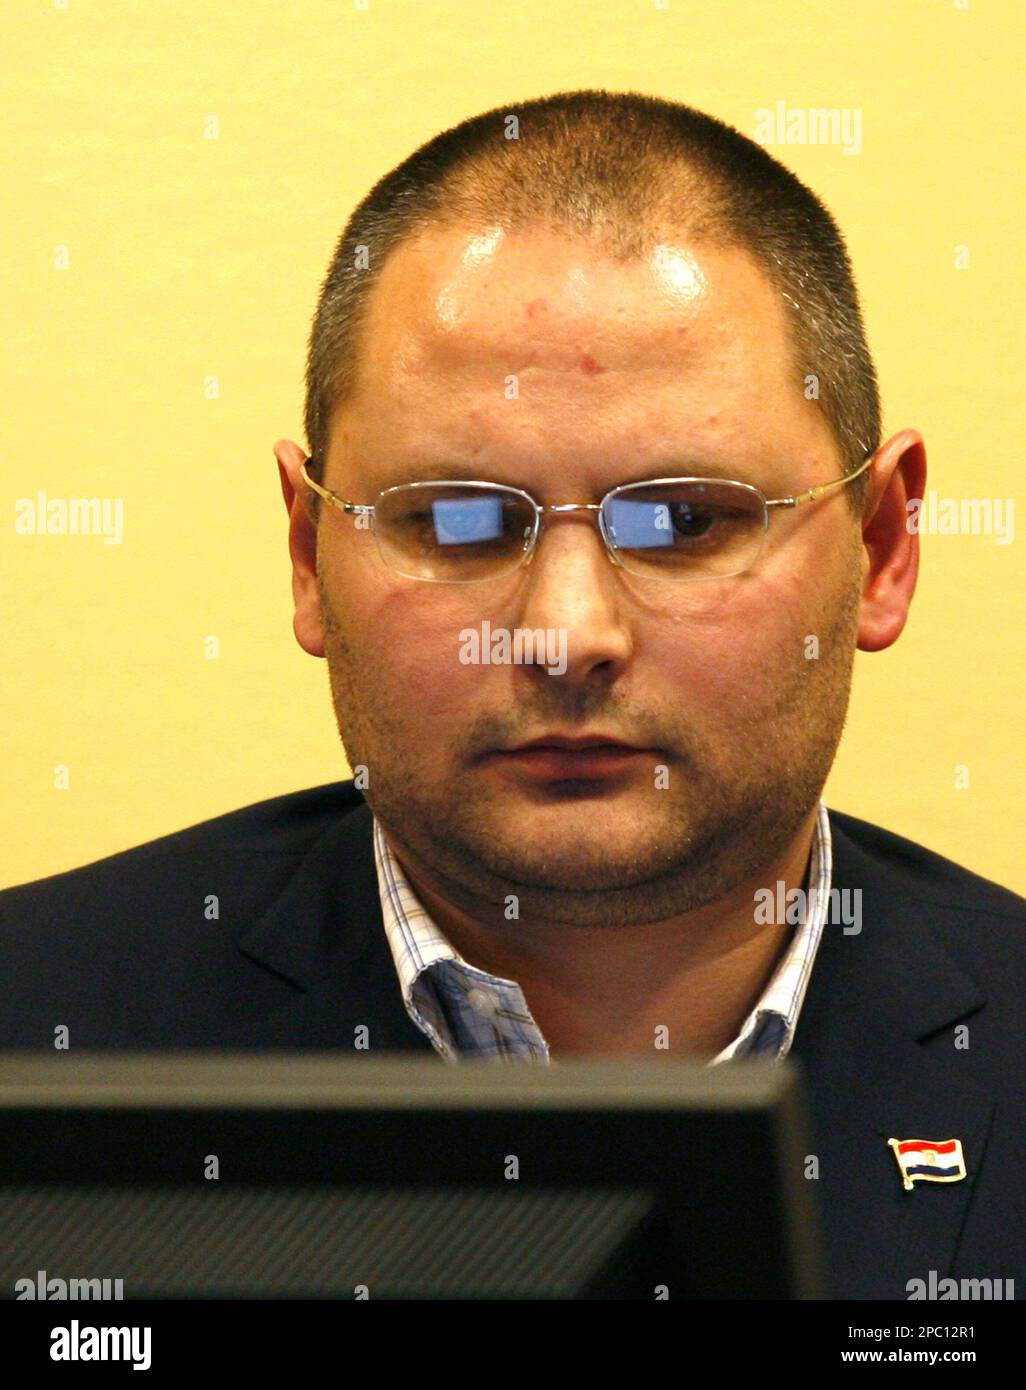 Croatian journalist Domagoj Margetic awaits the verdict of his contempt of court case at the Yugoslav war crimes tribunal (ICTY) in The Hague, Netherlands, Wednesday, Feb. 7, 2007. The Yugoslav war crimes tribunal sentenced Margetic to three months in prison Wednesday for publishing the names of protected witnesses on his Web site, a move prosecutors say damaged their efforts to shield people who testify at the U.N. court. Margetic was also fined euro10,000 (US$13,000) after being found guilty of contempt of court. "Journalists are free to report and comment on all proceedings before the tribu Stock Photo